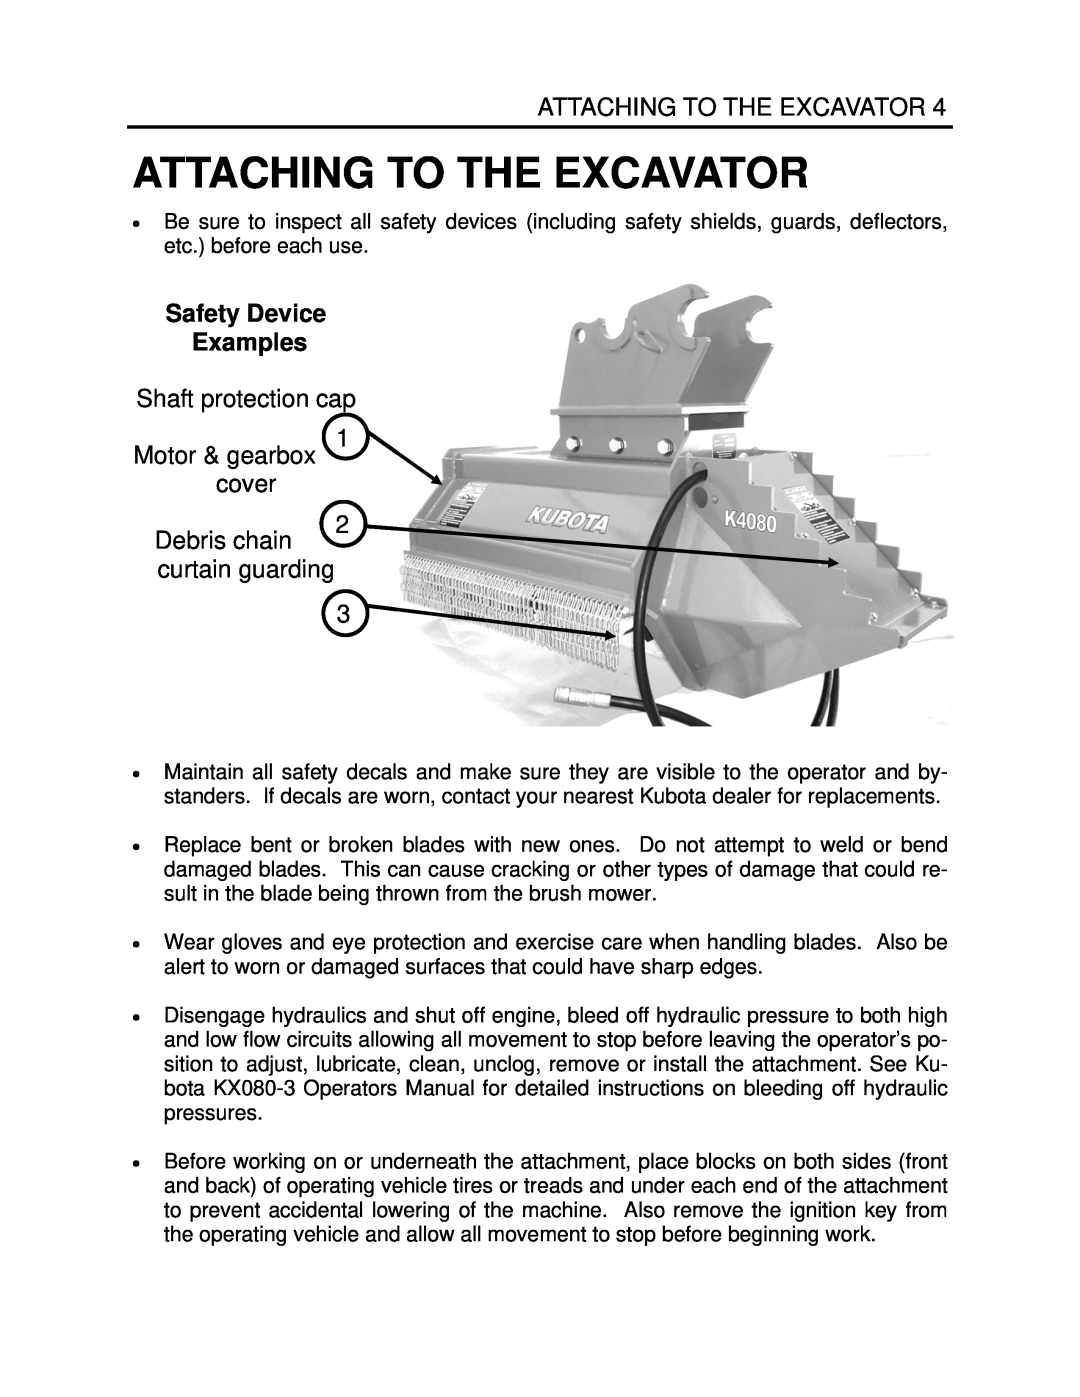 Generac Power Systems K4080 manual Attaching To The Excavator, Safety Device Examples 